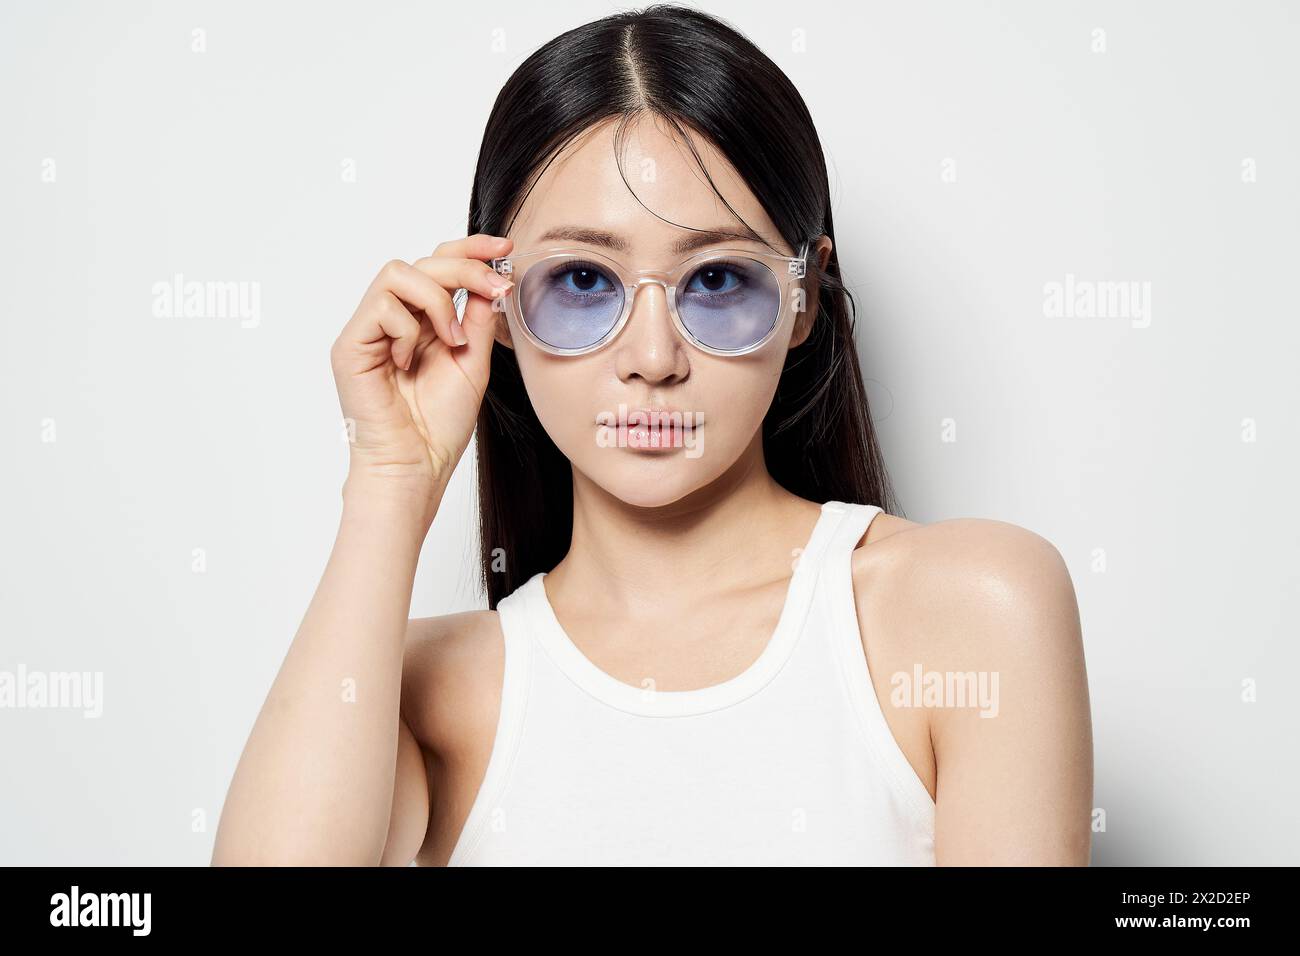 Asian Woman Laughing in Transparent Sunglasses Stock Photo